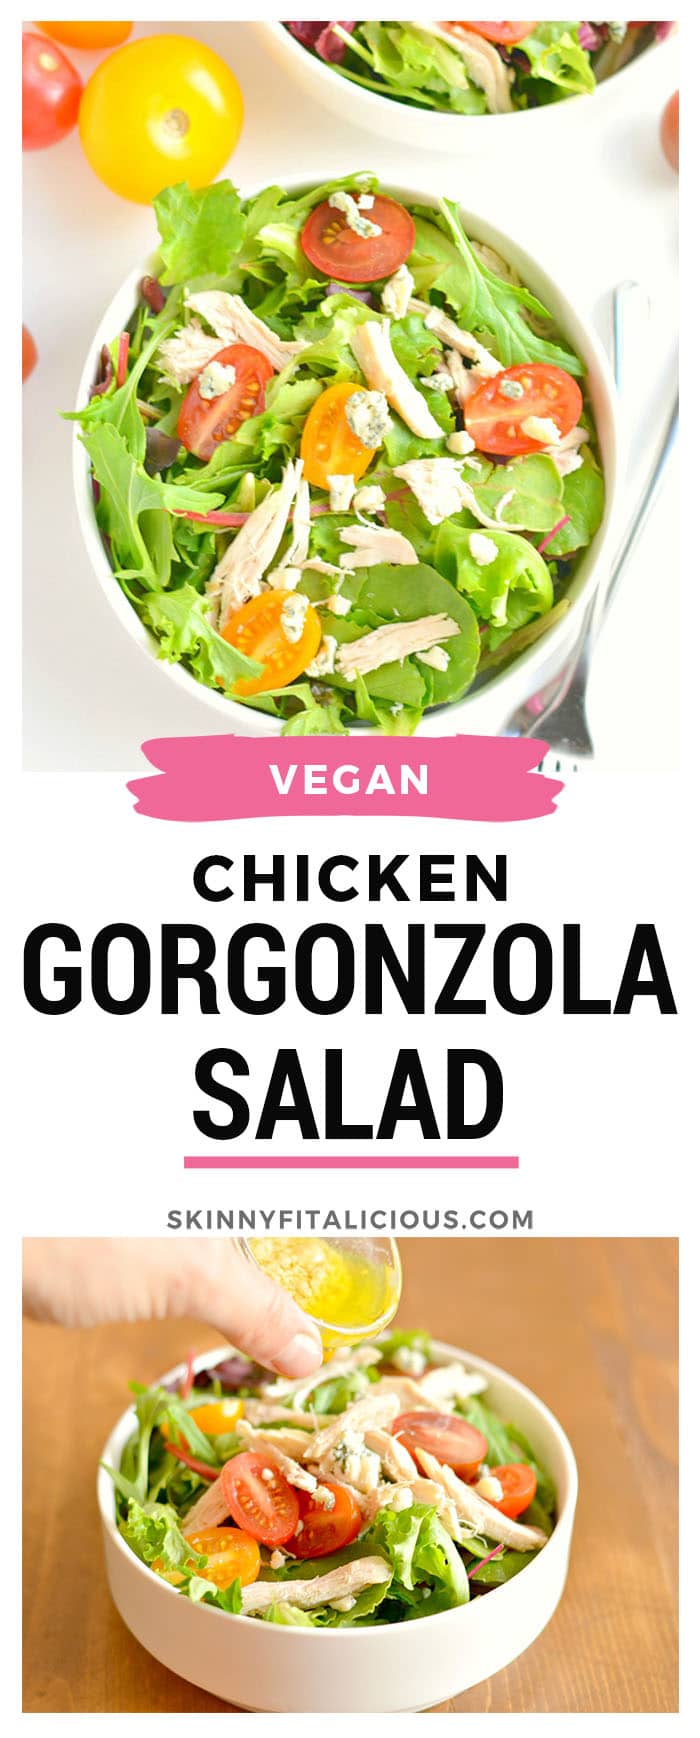 A light & vibrant Tomato Chicken Gorgonzola Salad! An easy gluten free recipe you can prep ahead of time and assemble during the week on the go. Paired with a creamy gorgonzola dressing, this flavorful salad is one you can enjoy all summer long! Gluten Free + Low Calorie